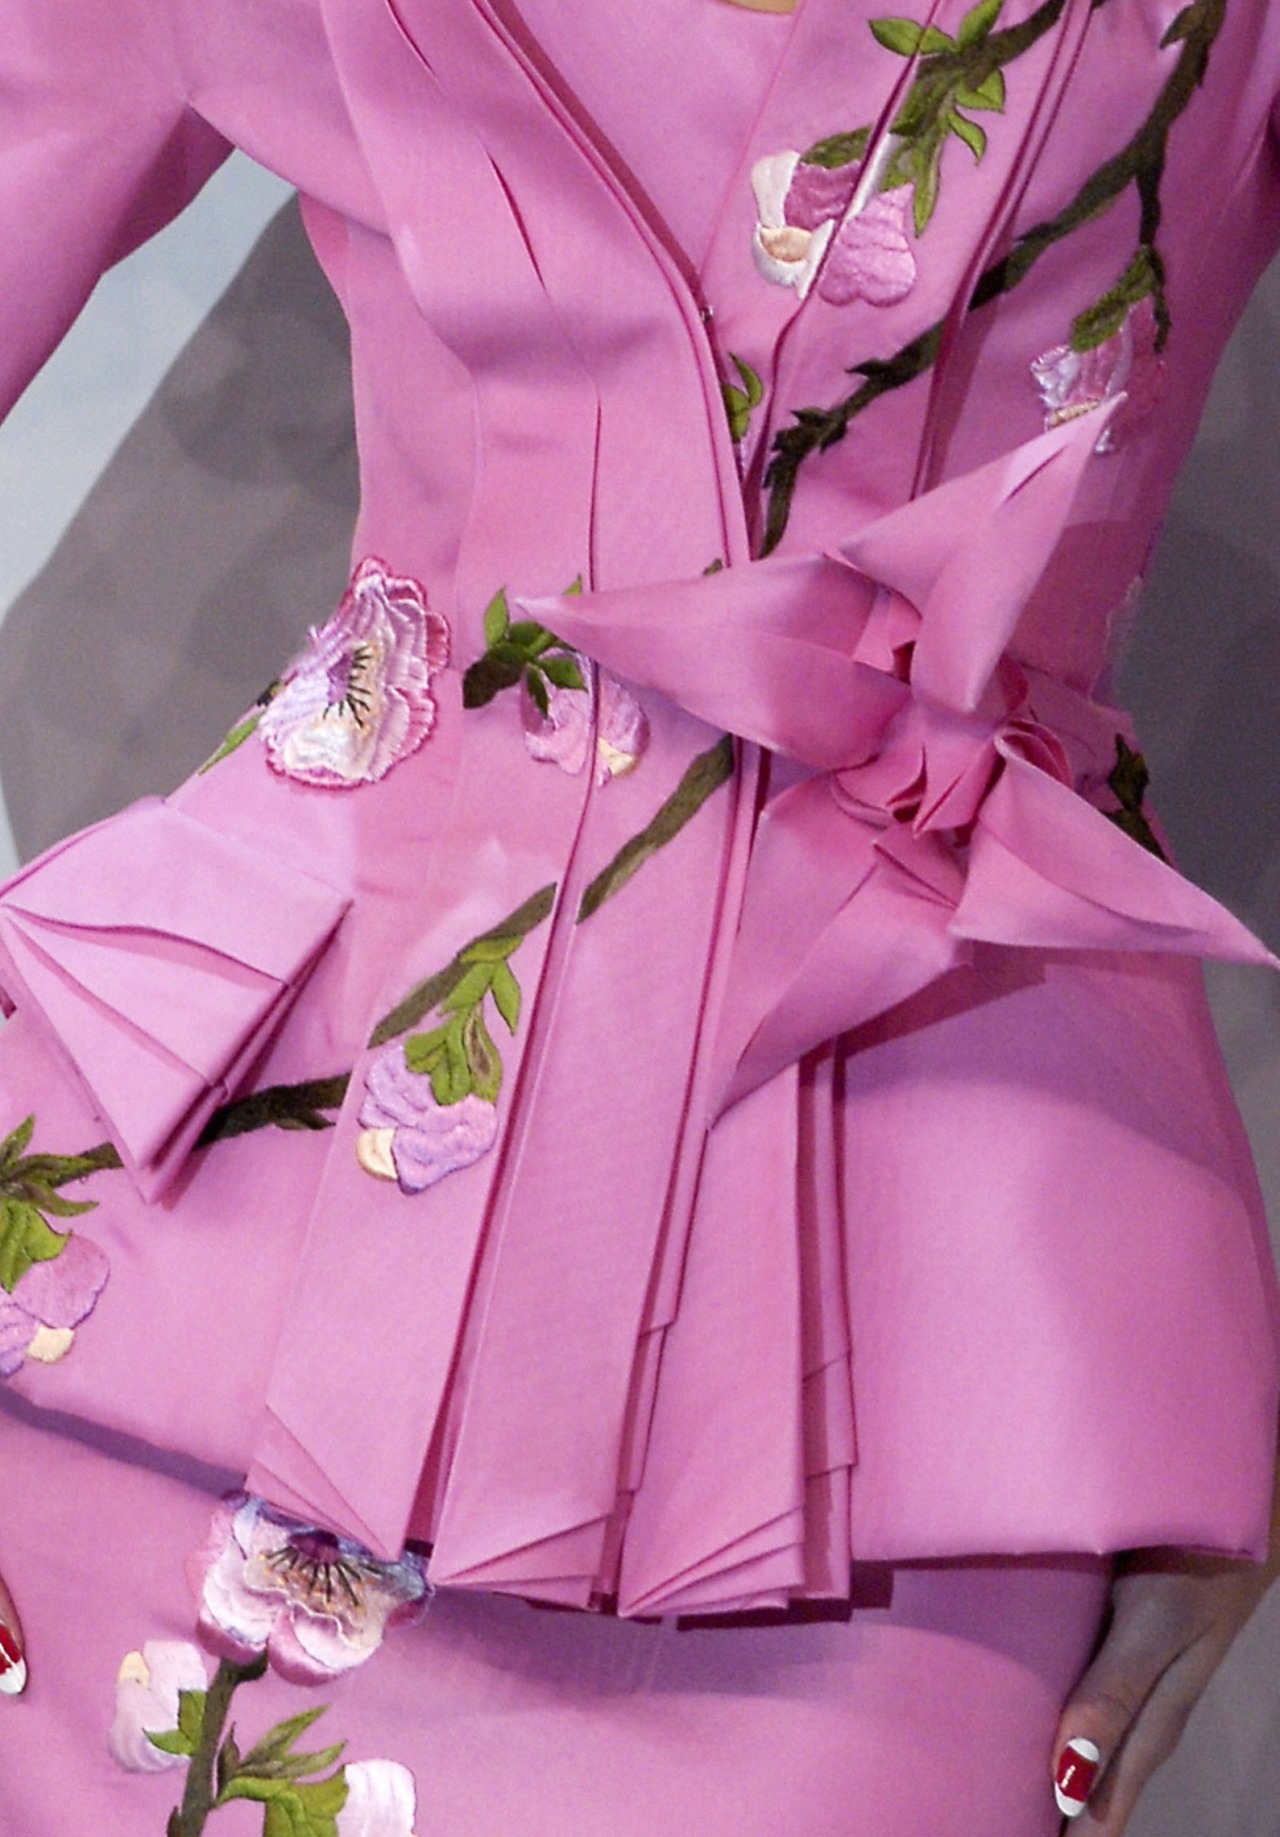 Wendy Enchanted — lelaid: Christian Dior Haute Couture S/S 2007